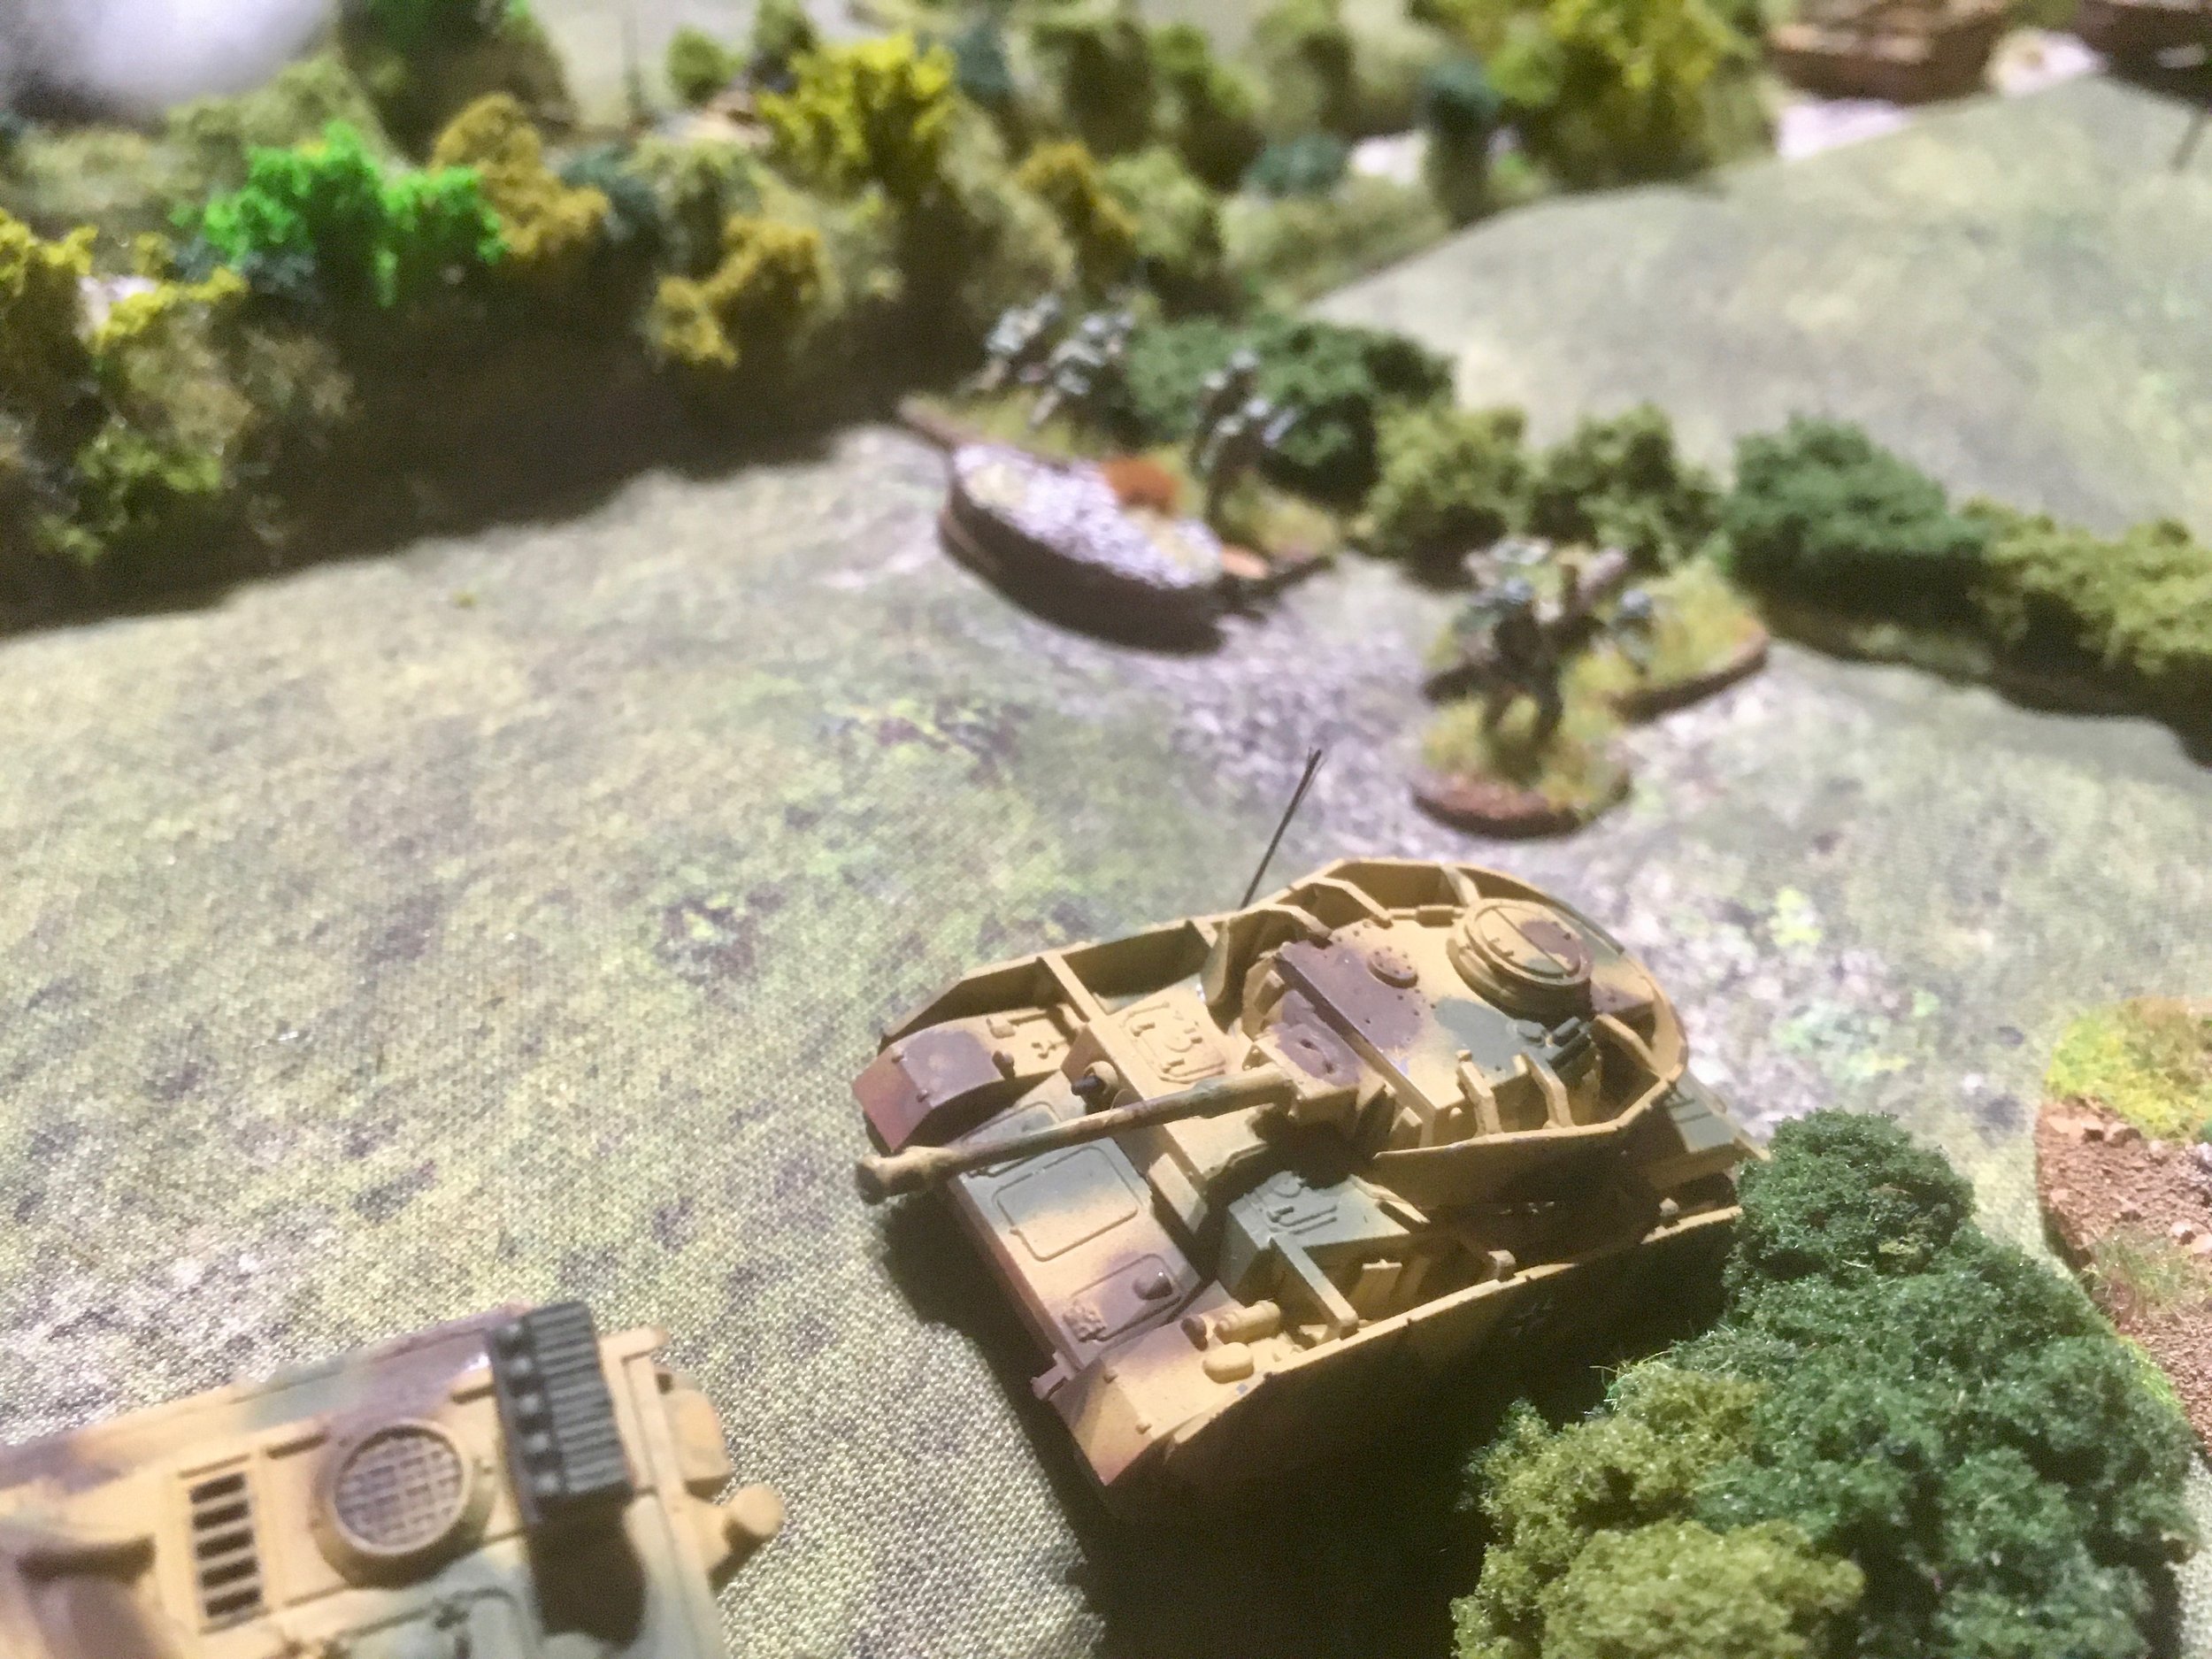 As the Panzers pushed past the remnants of the British troops on the German left, spraying them with machine-gun fire as they went...